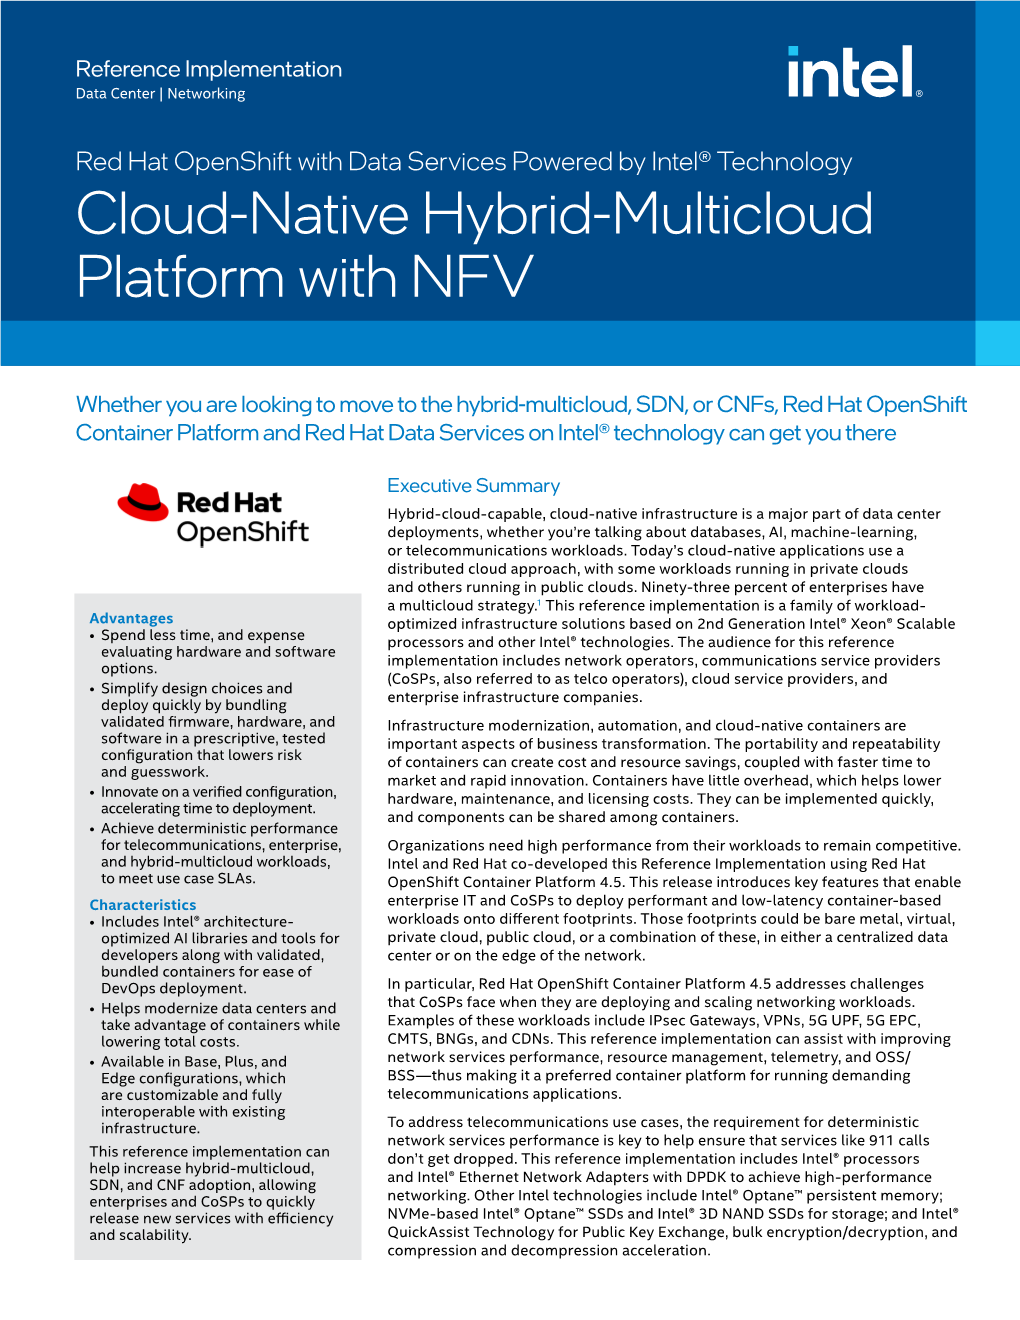 Cloud-Native Hybrid-Multicloud with Network Functions Virtualization